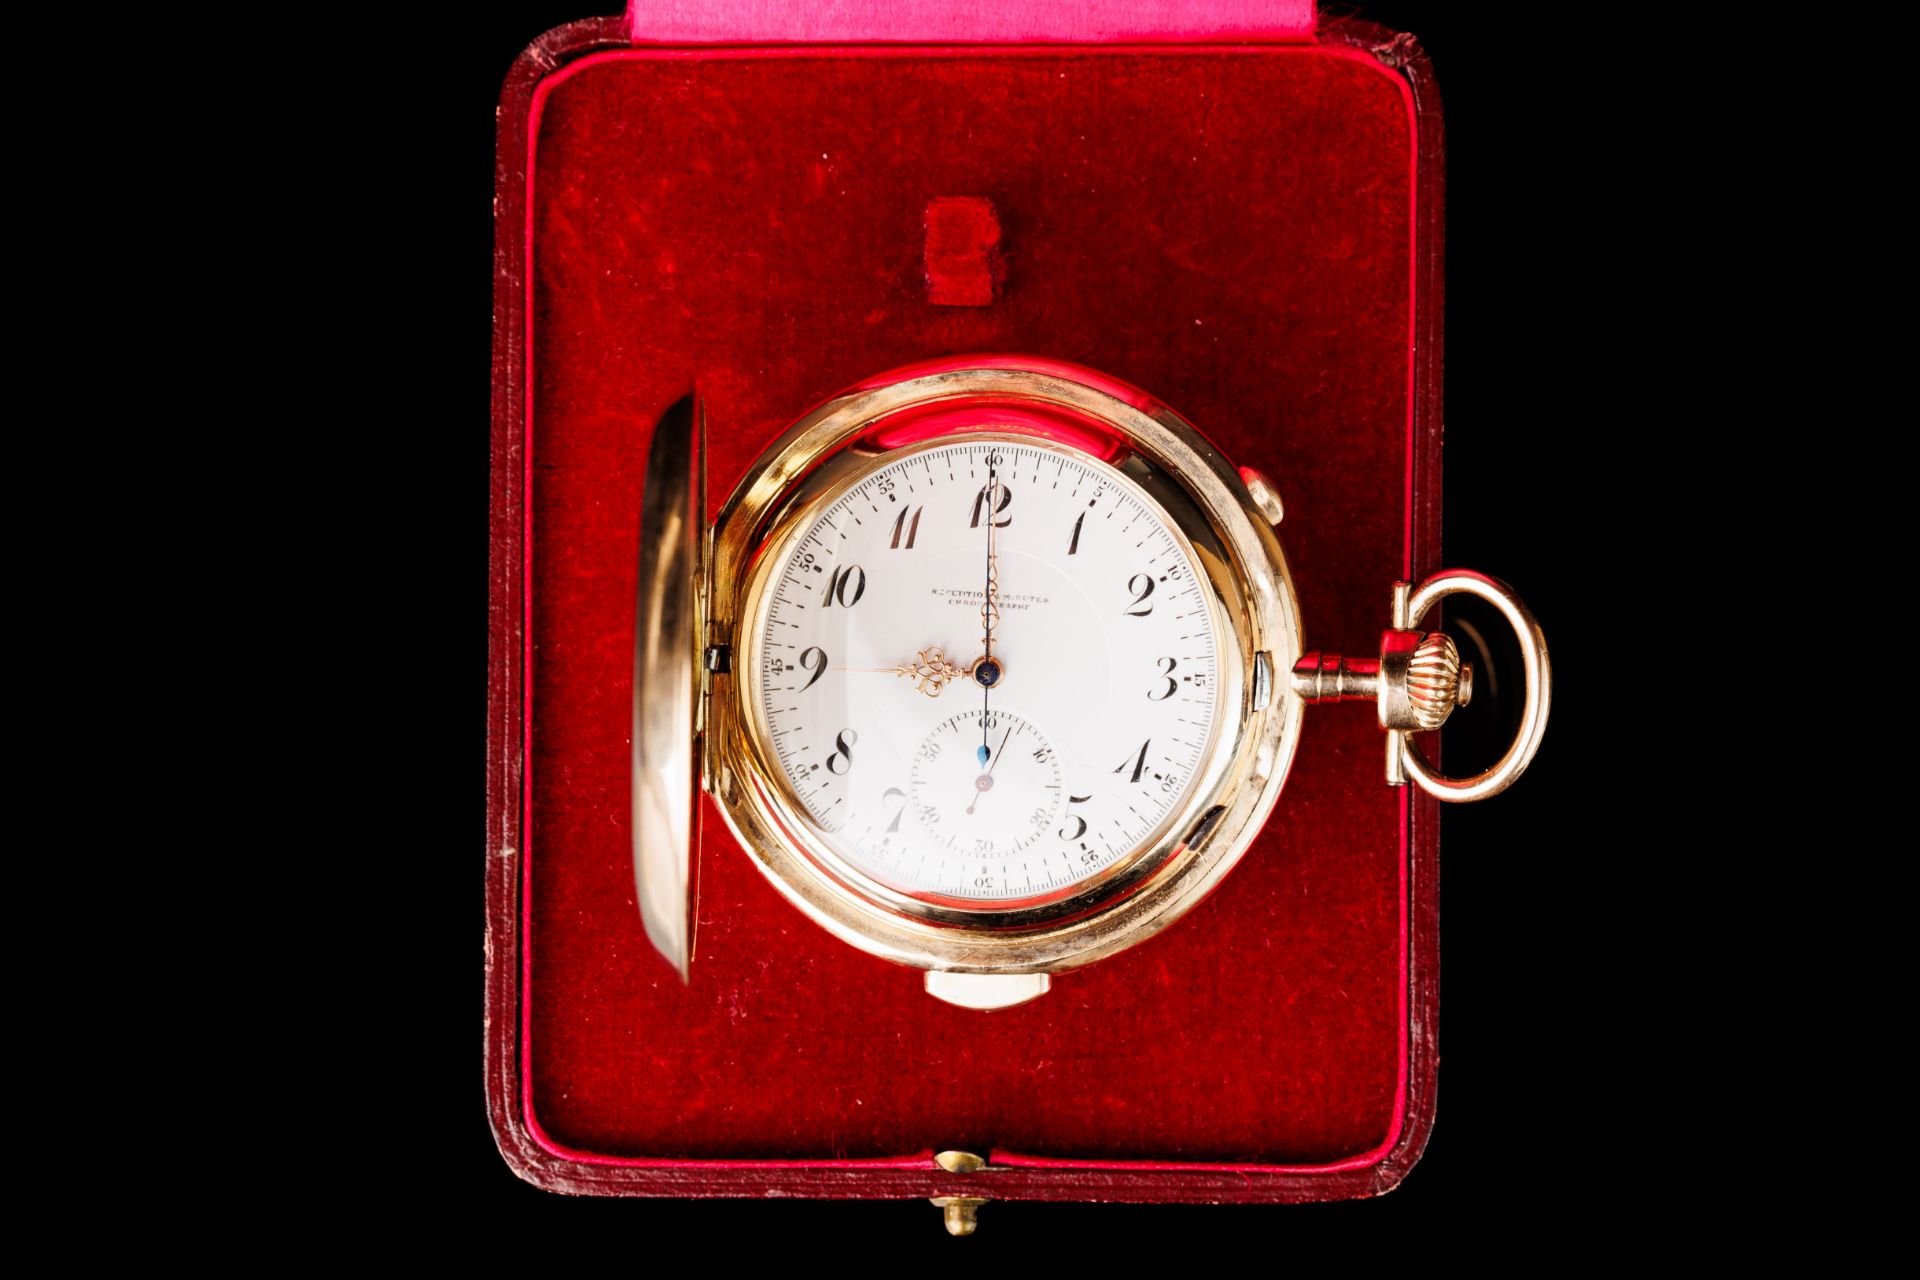 Antique Gold Pocket Watch with Chime in a Case. Geneva. Switzerland. - Image 5 of 9